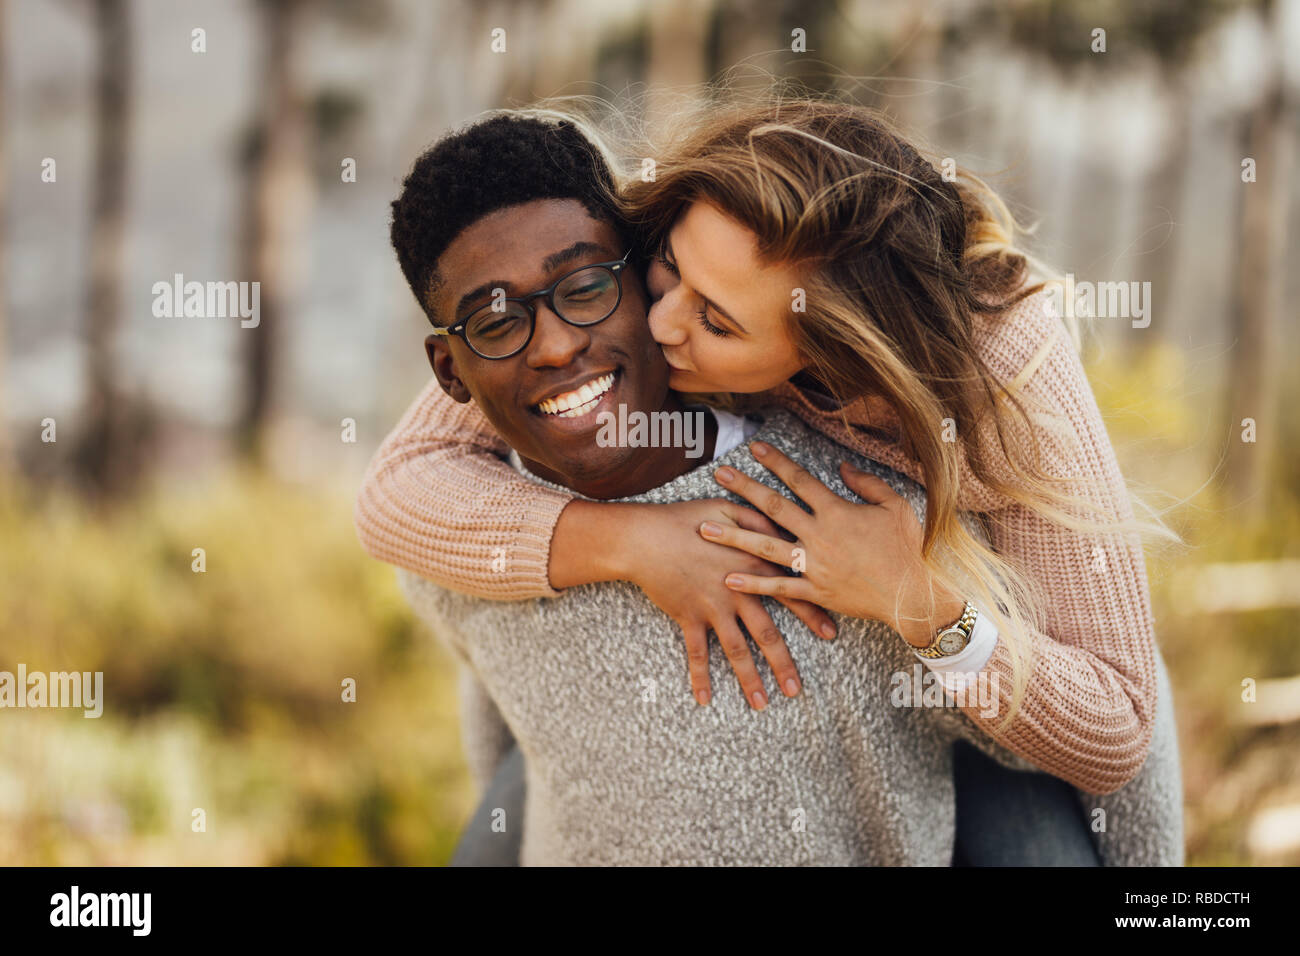 Handsome young man giving piggyback ride to his girlfriend. Couple having fun outdoors. Man carrying his girlfriend on his back, with woman kissing ma Stock Photo